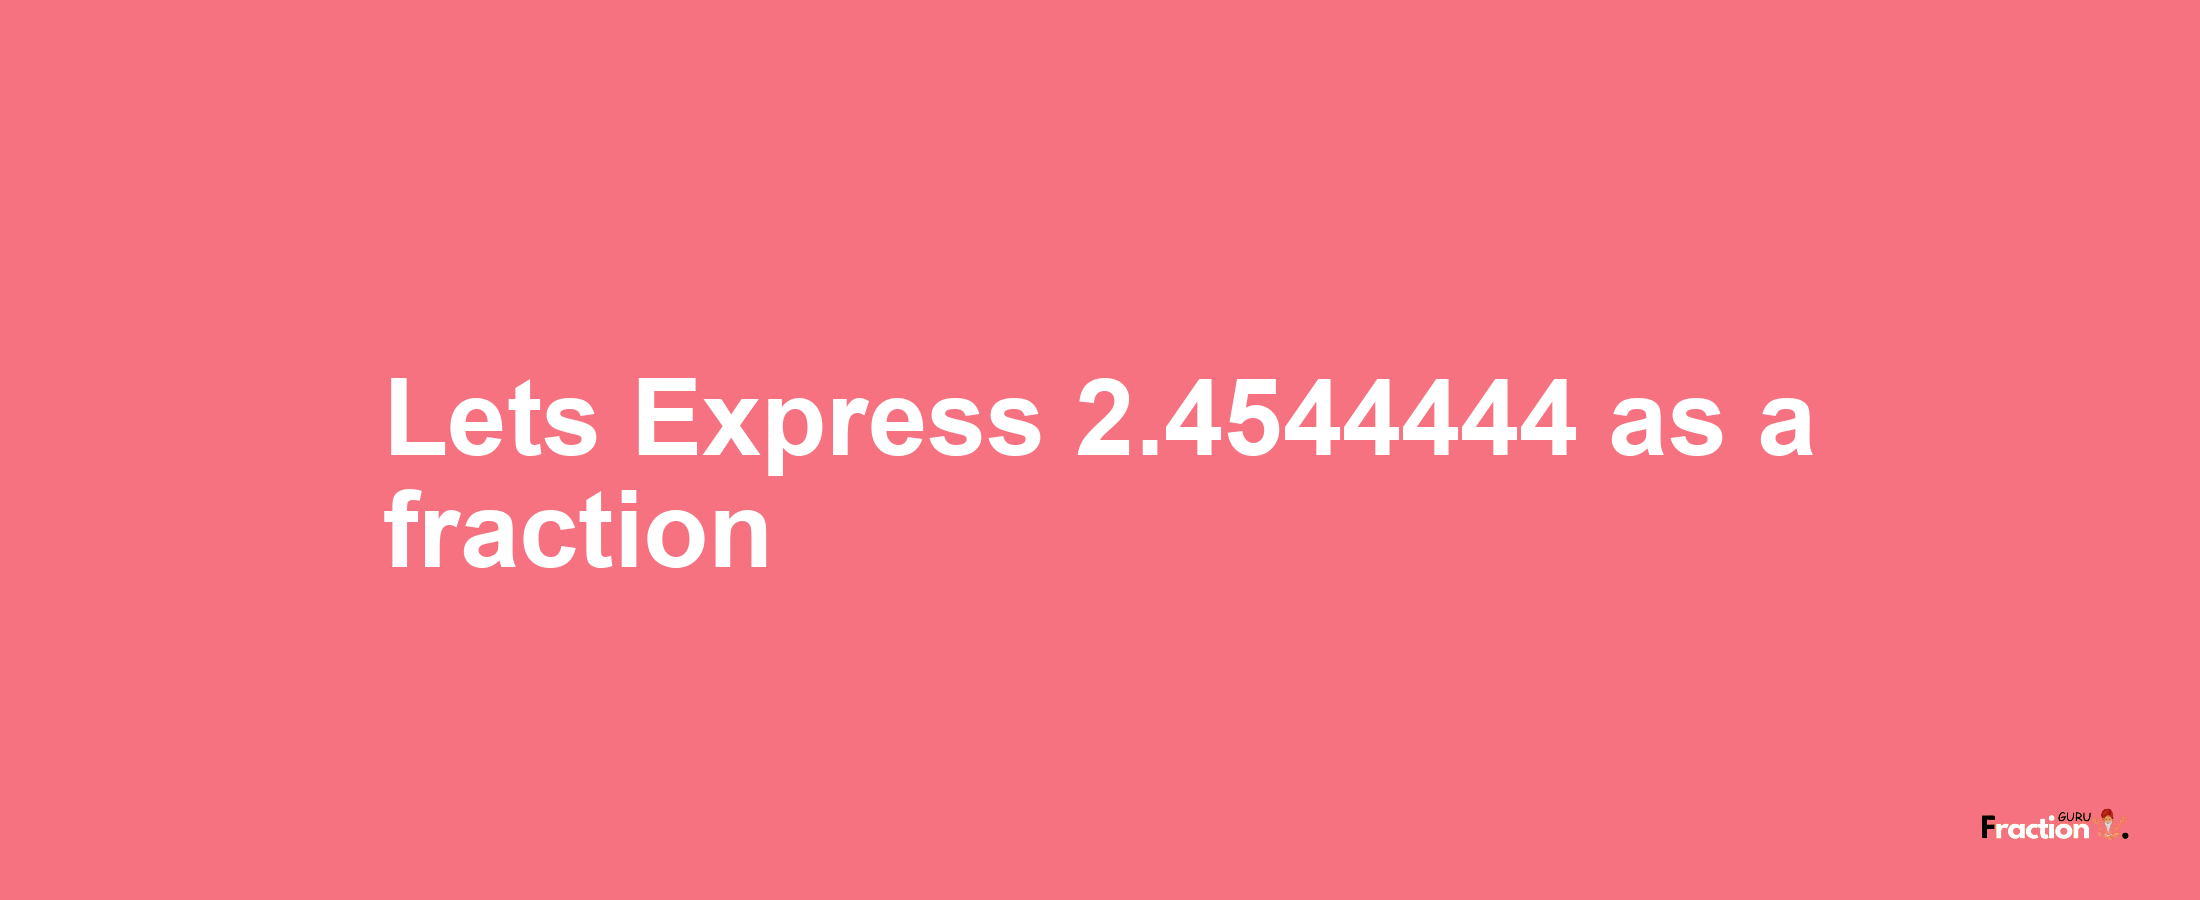 Lets Express 2.4544444 as afraction